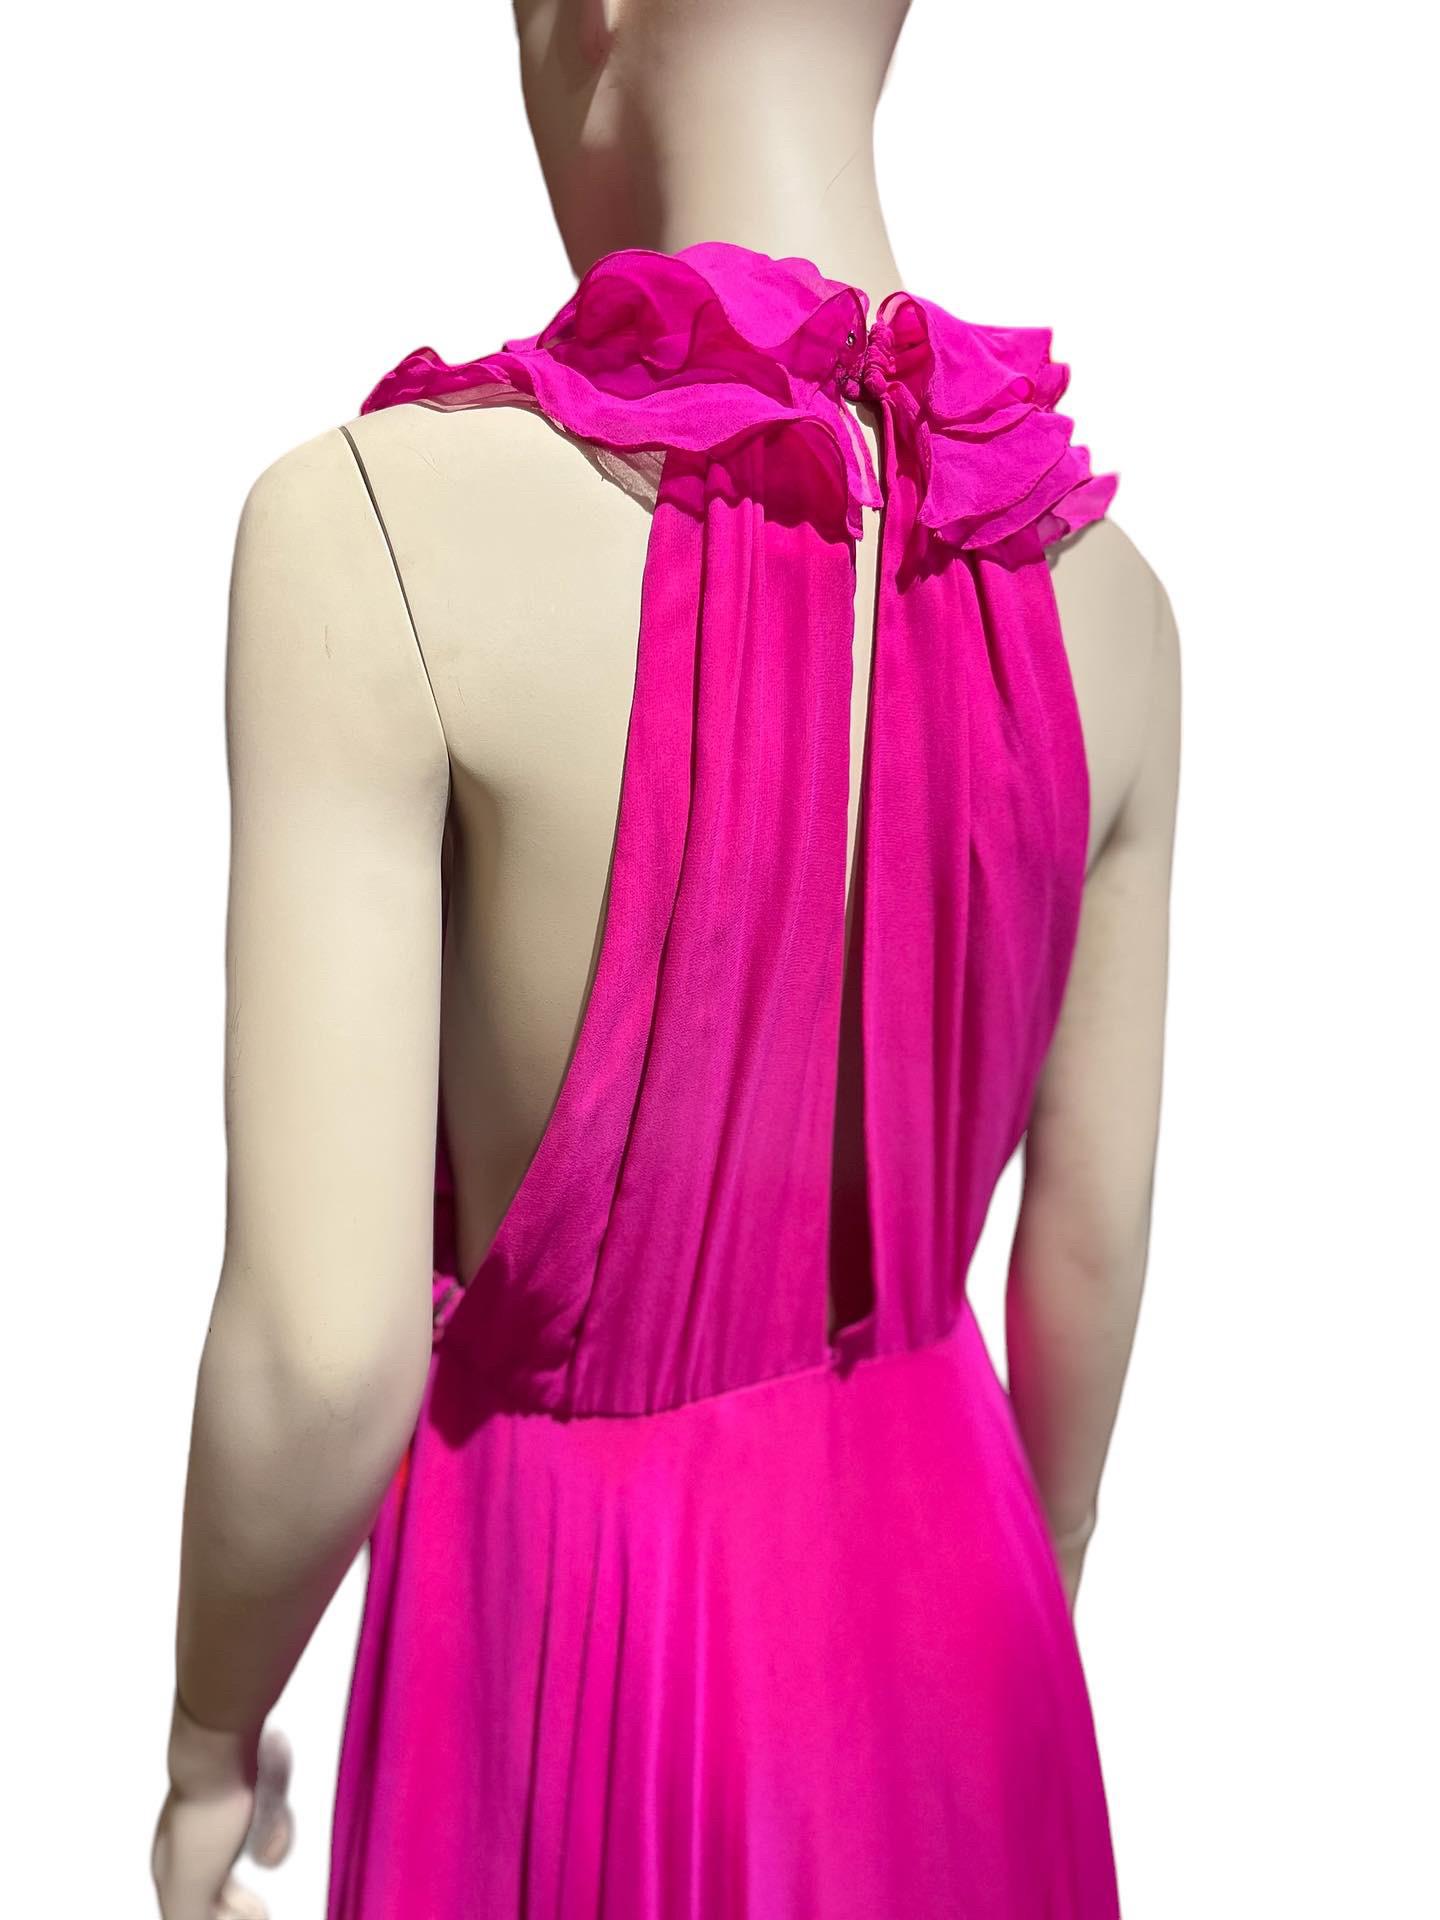 Y2K Stephen Burrows Fuchsia Silk Chiffon Ruffle Dress 

Size: 8

Stephen Burrows is an American fashion designer based in New York City, known for being one of the first African-American fashion designers to sell internationally and develop a